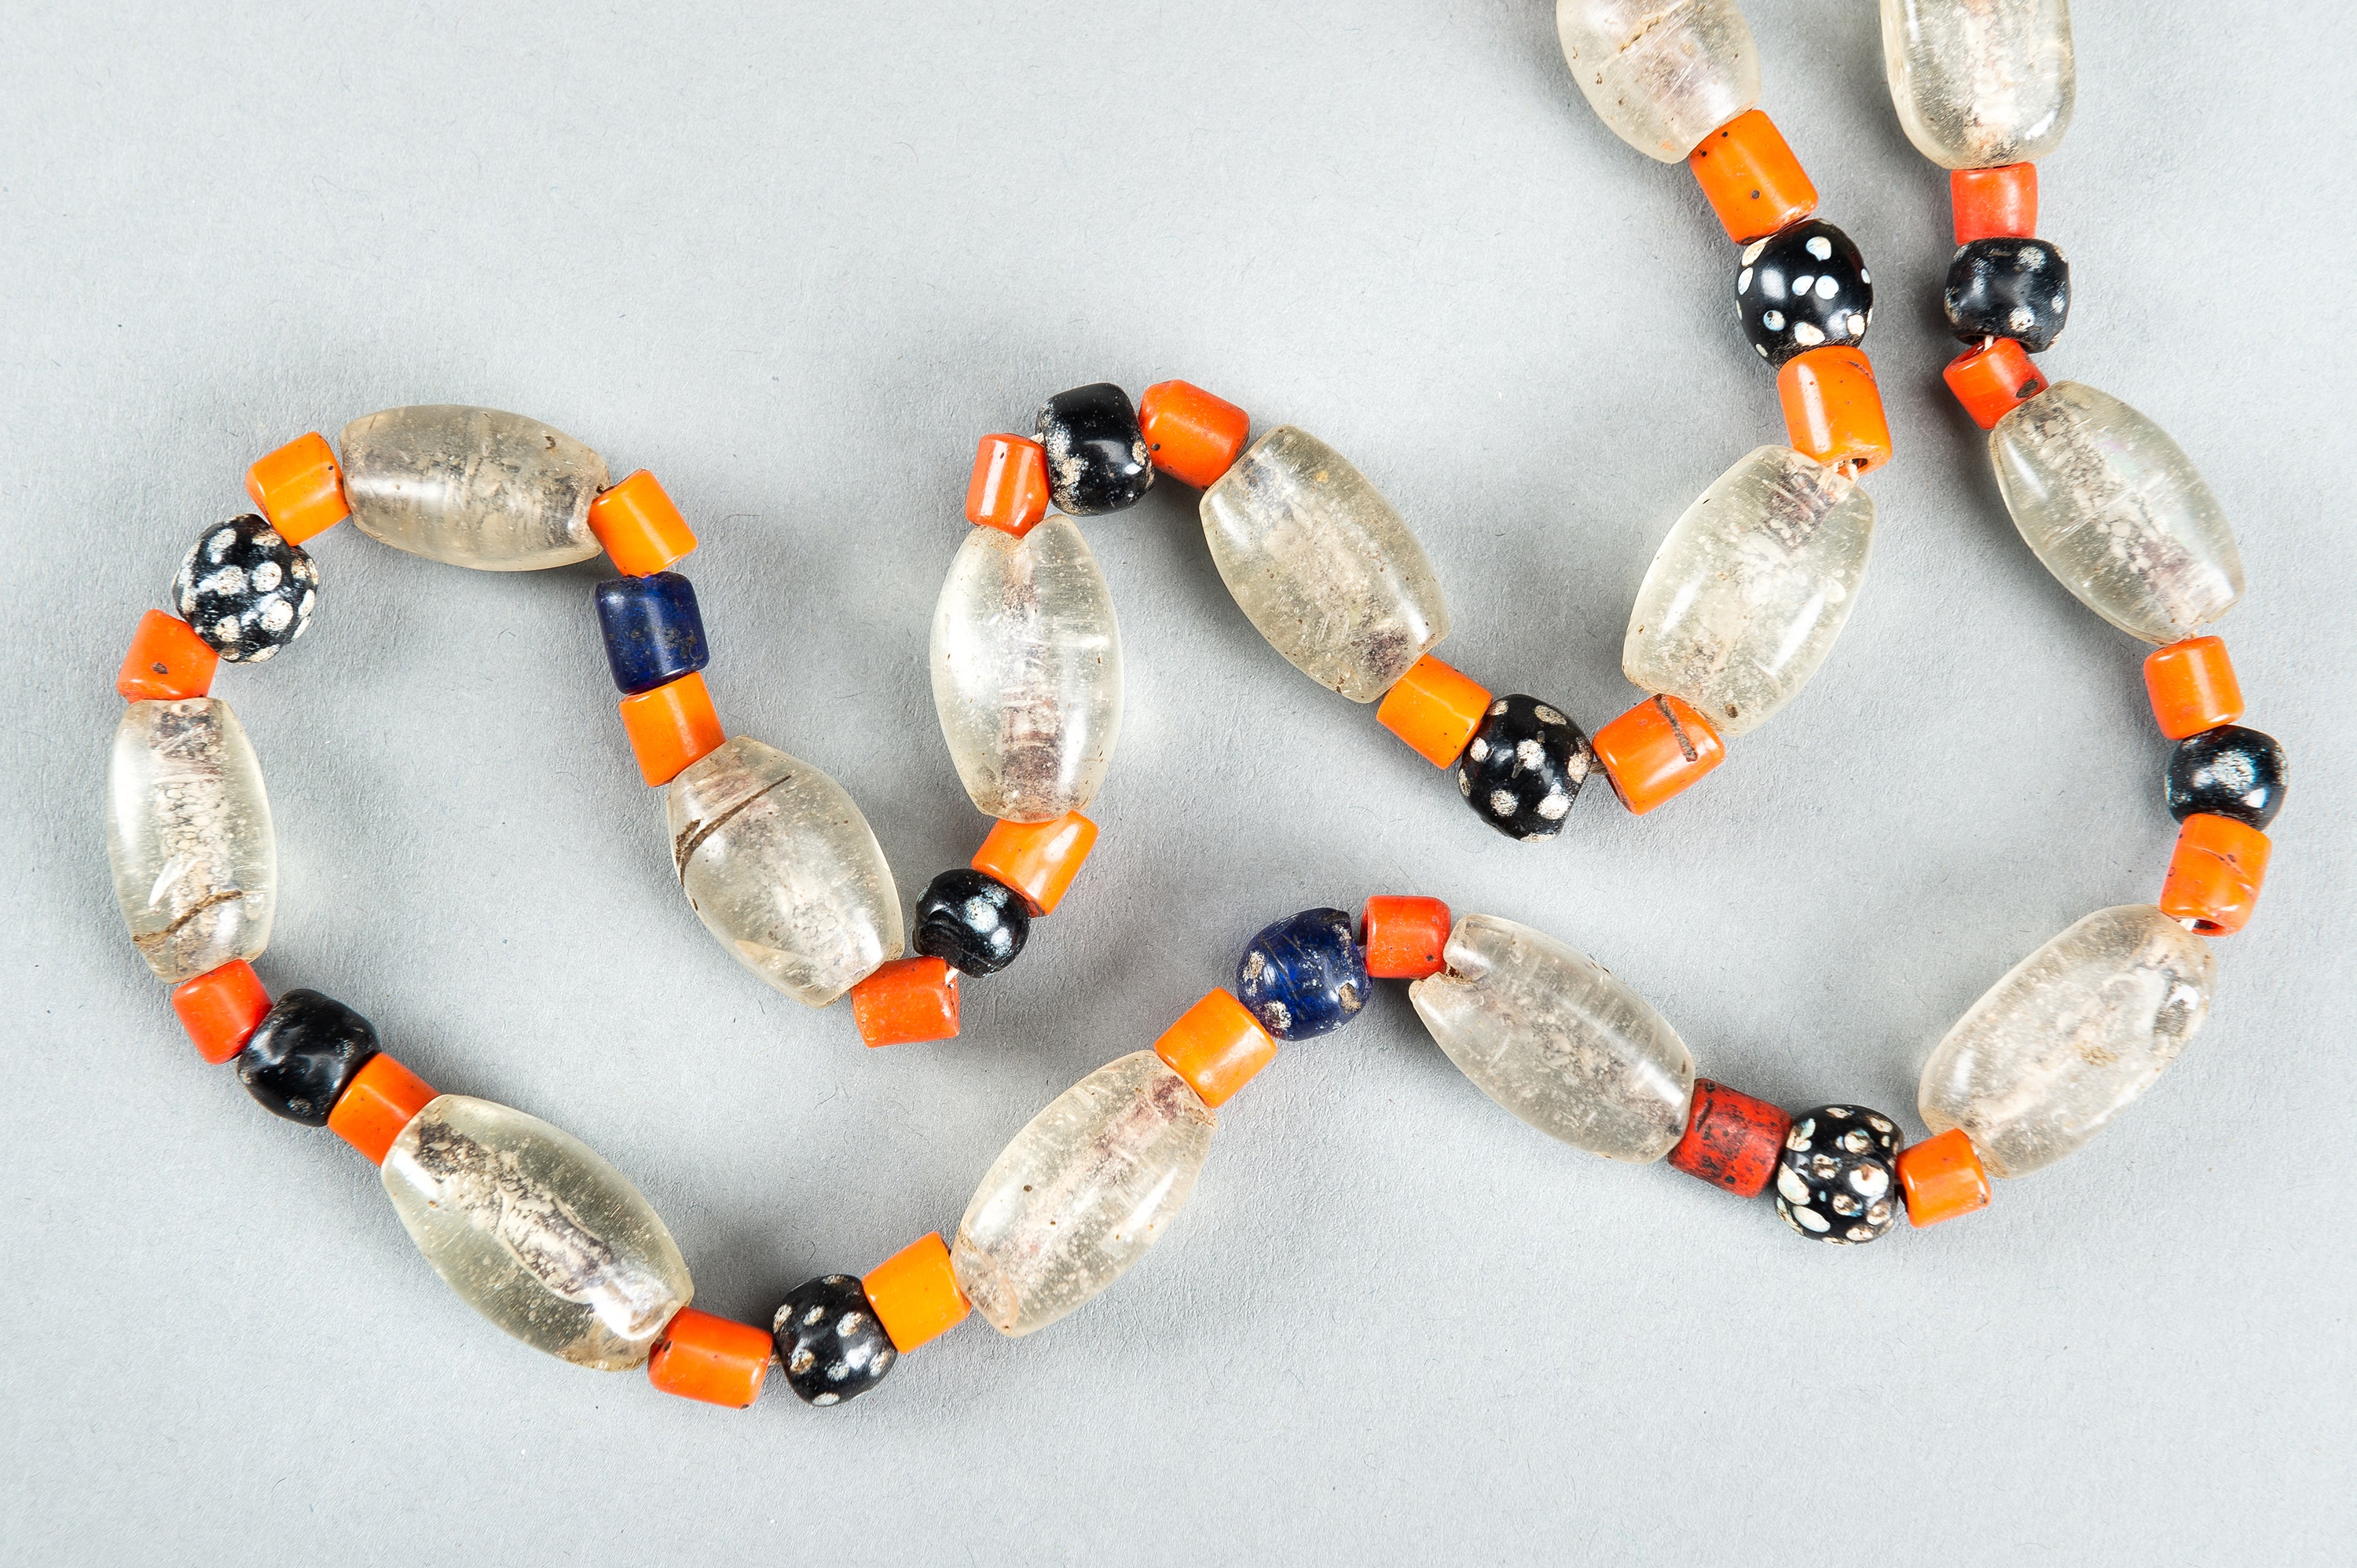 A MULTI-COLORED NAGALAND GLASS NECKLACE, c. 1900s - Image 7 of 10